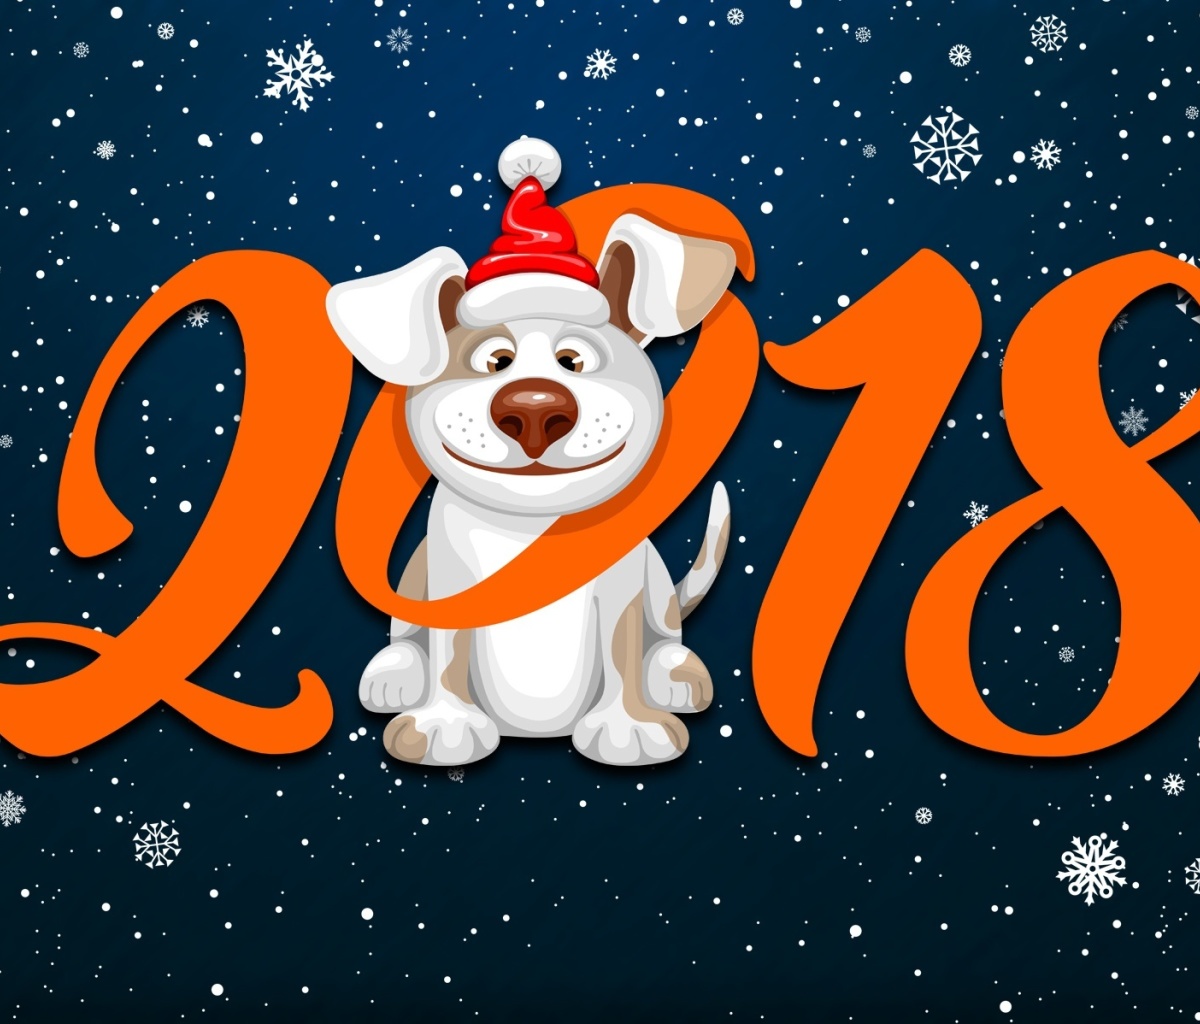 New Year Dog 2018 with Snow wallpaper 1200x1024